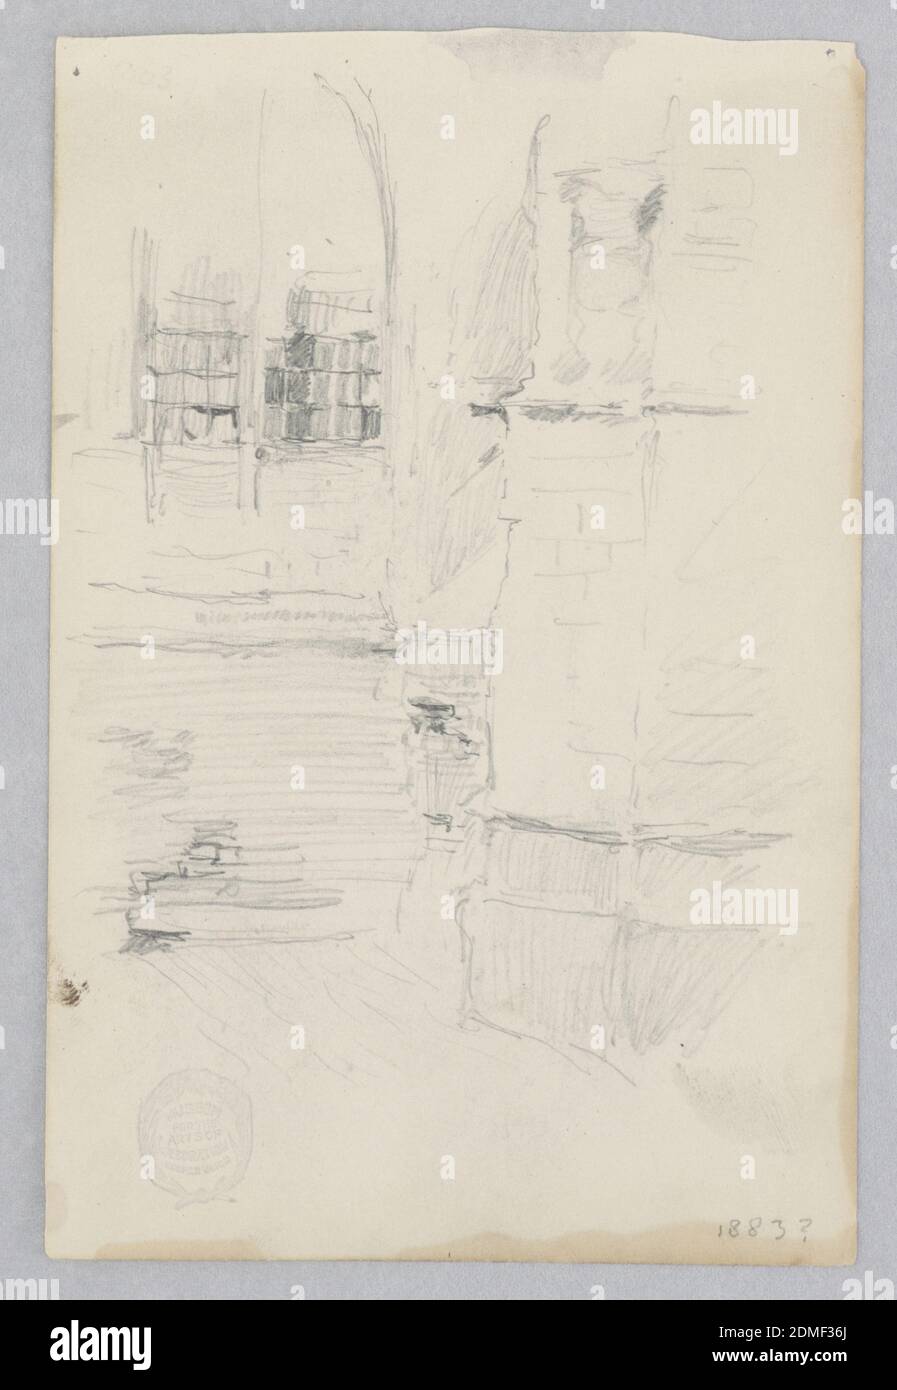 Doorway, Robert Frederick Blum, American, 1857–1903, Graphite on wove paper, Sketch of an arched doorway., USA, 1883, architecture, Drawing Stock Photo